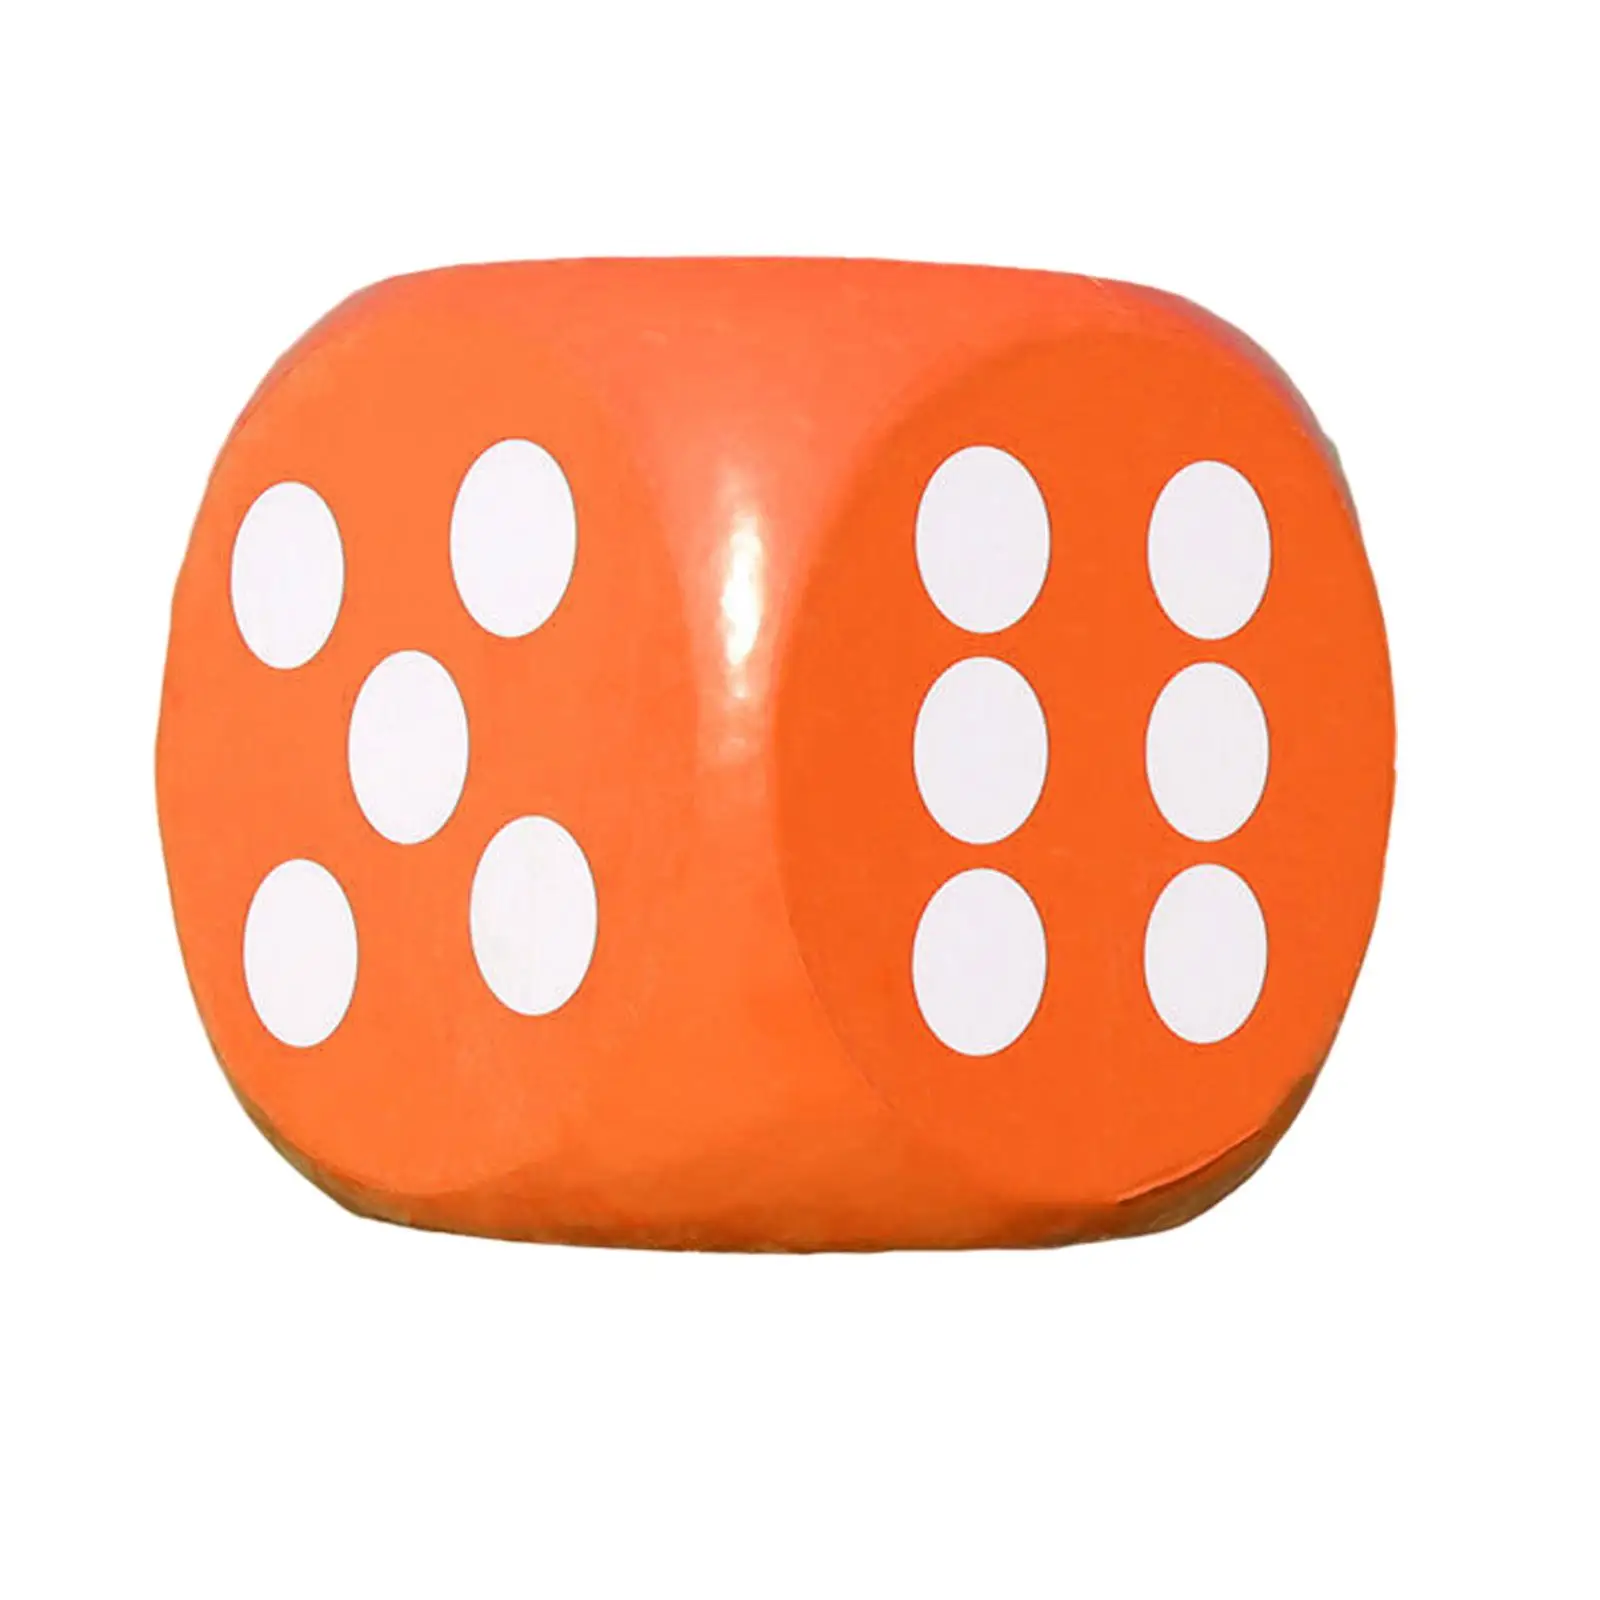 20cm Foam Dice Learn Math Counting Educational Toys Develop Intelligence Stem Learning Playing Dice for Teacher Students Kids